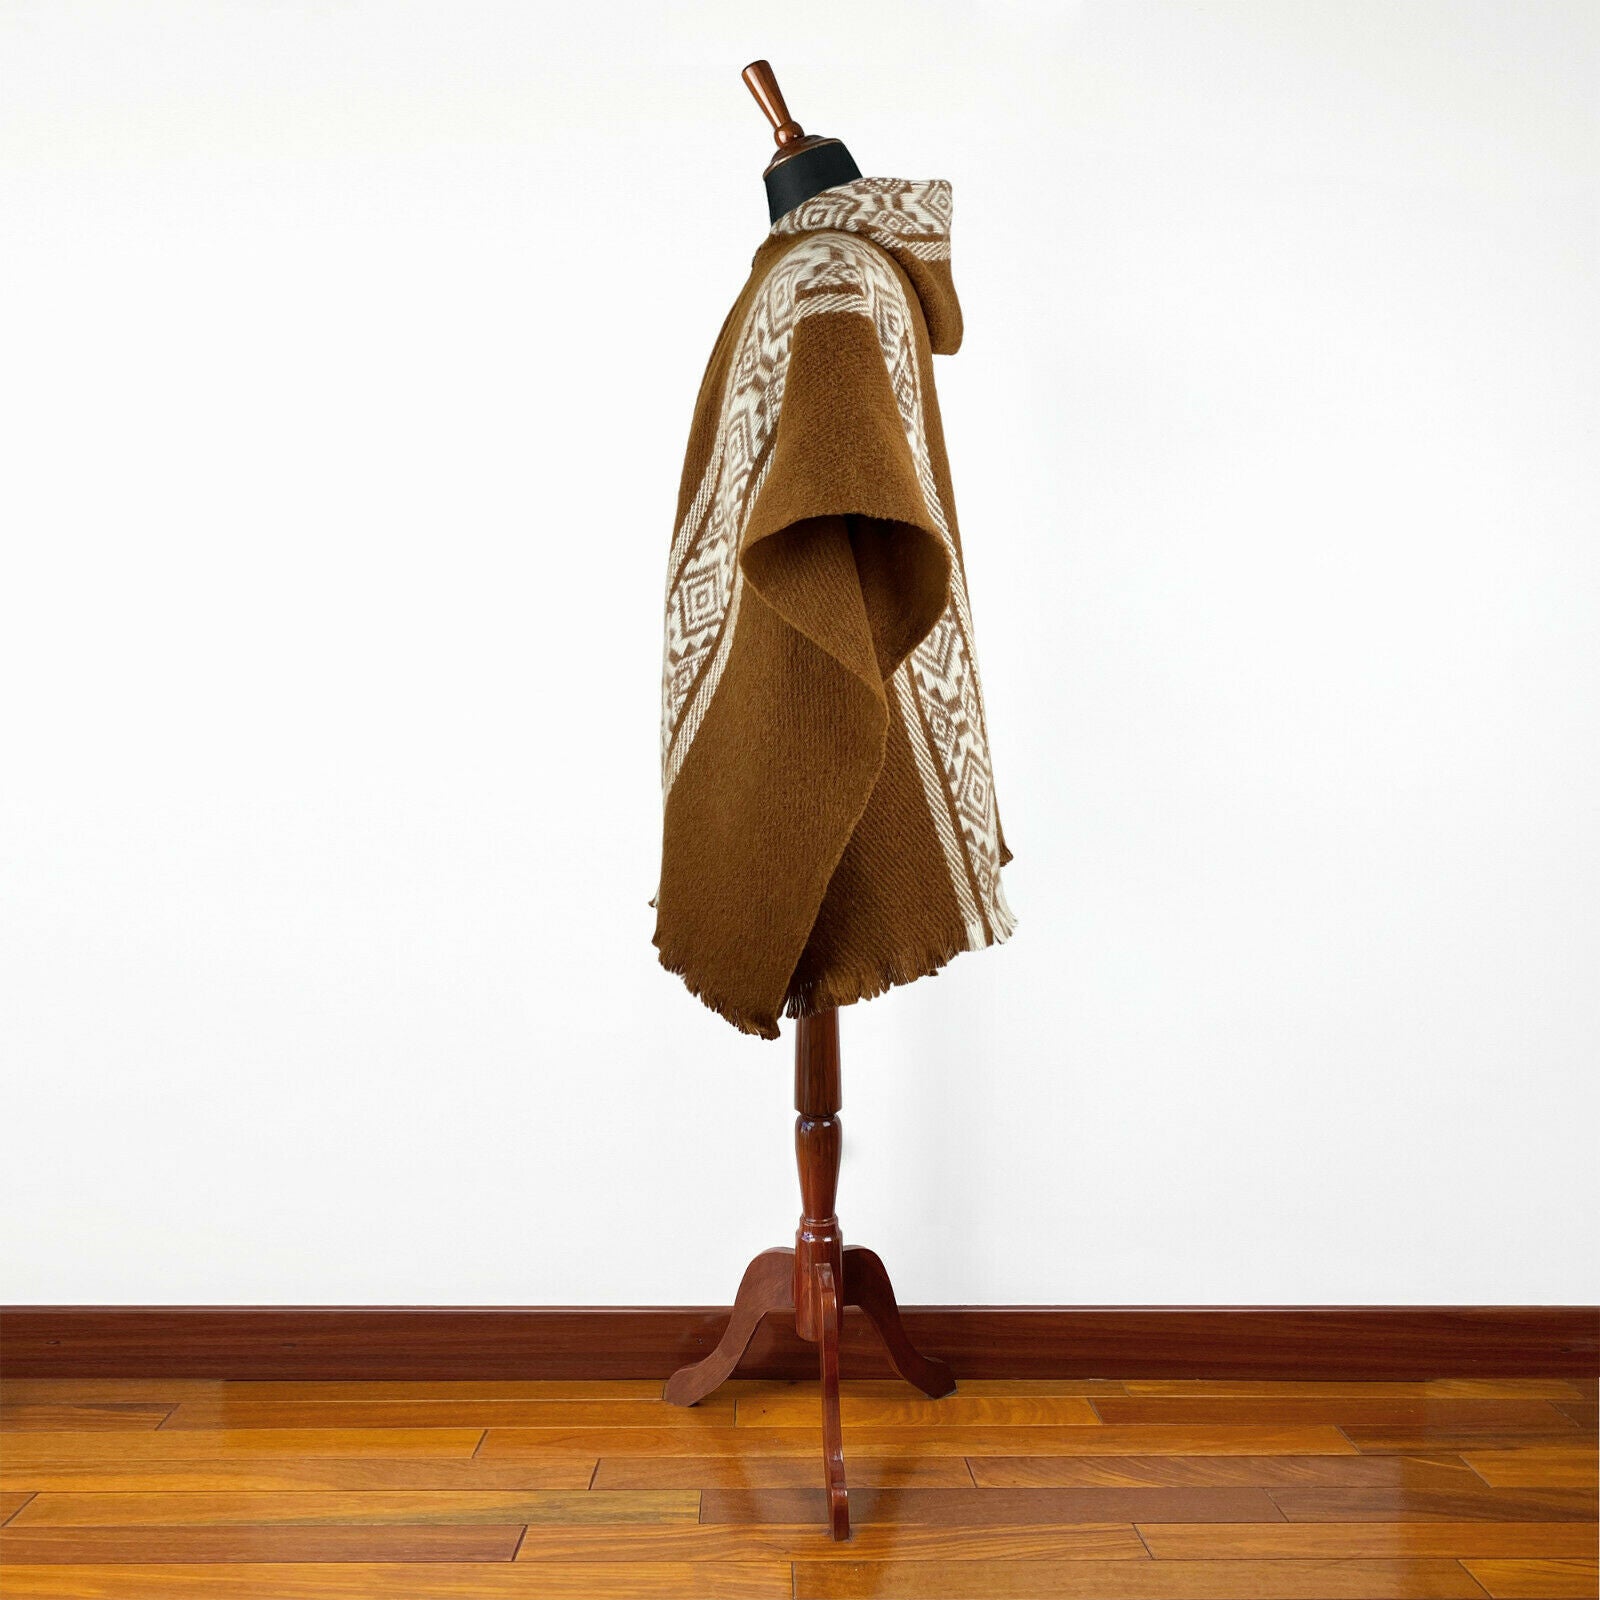 Kunki - Llama Wool Unisex South American Handwoven Hooded Poncho - brown with diamonds pattern